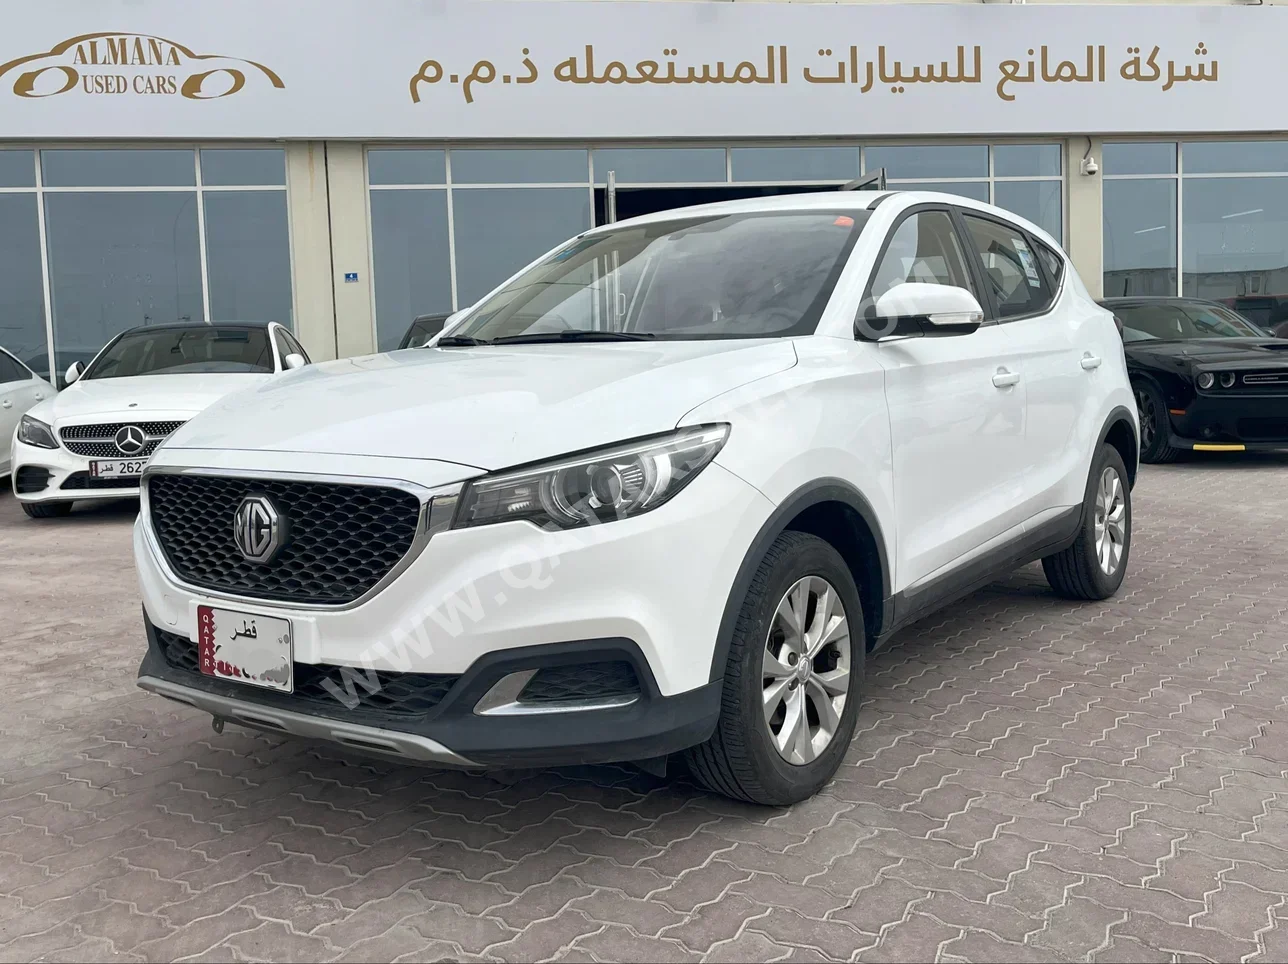 MG  Zs  2020  Automatic  49,000 Km  4 Cylinder  Front Wheel Drive (FWD)  SUV  White  With Warranty